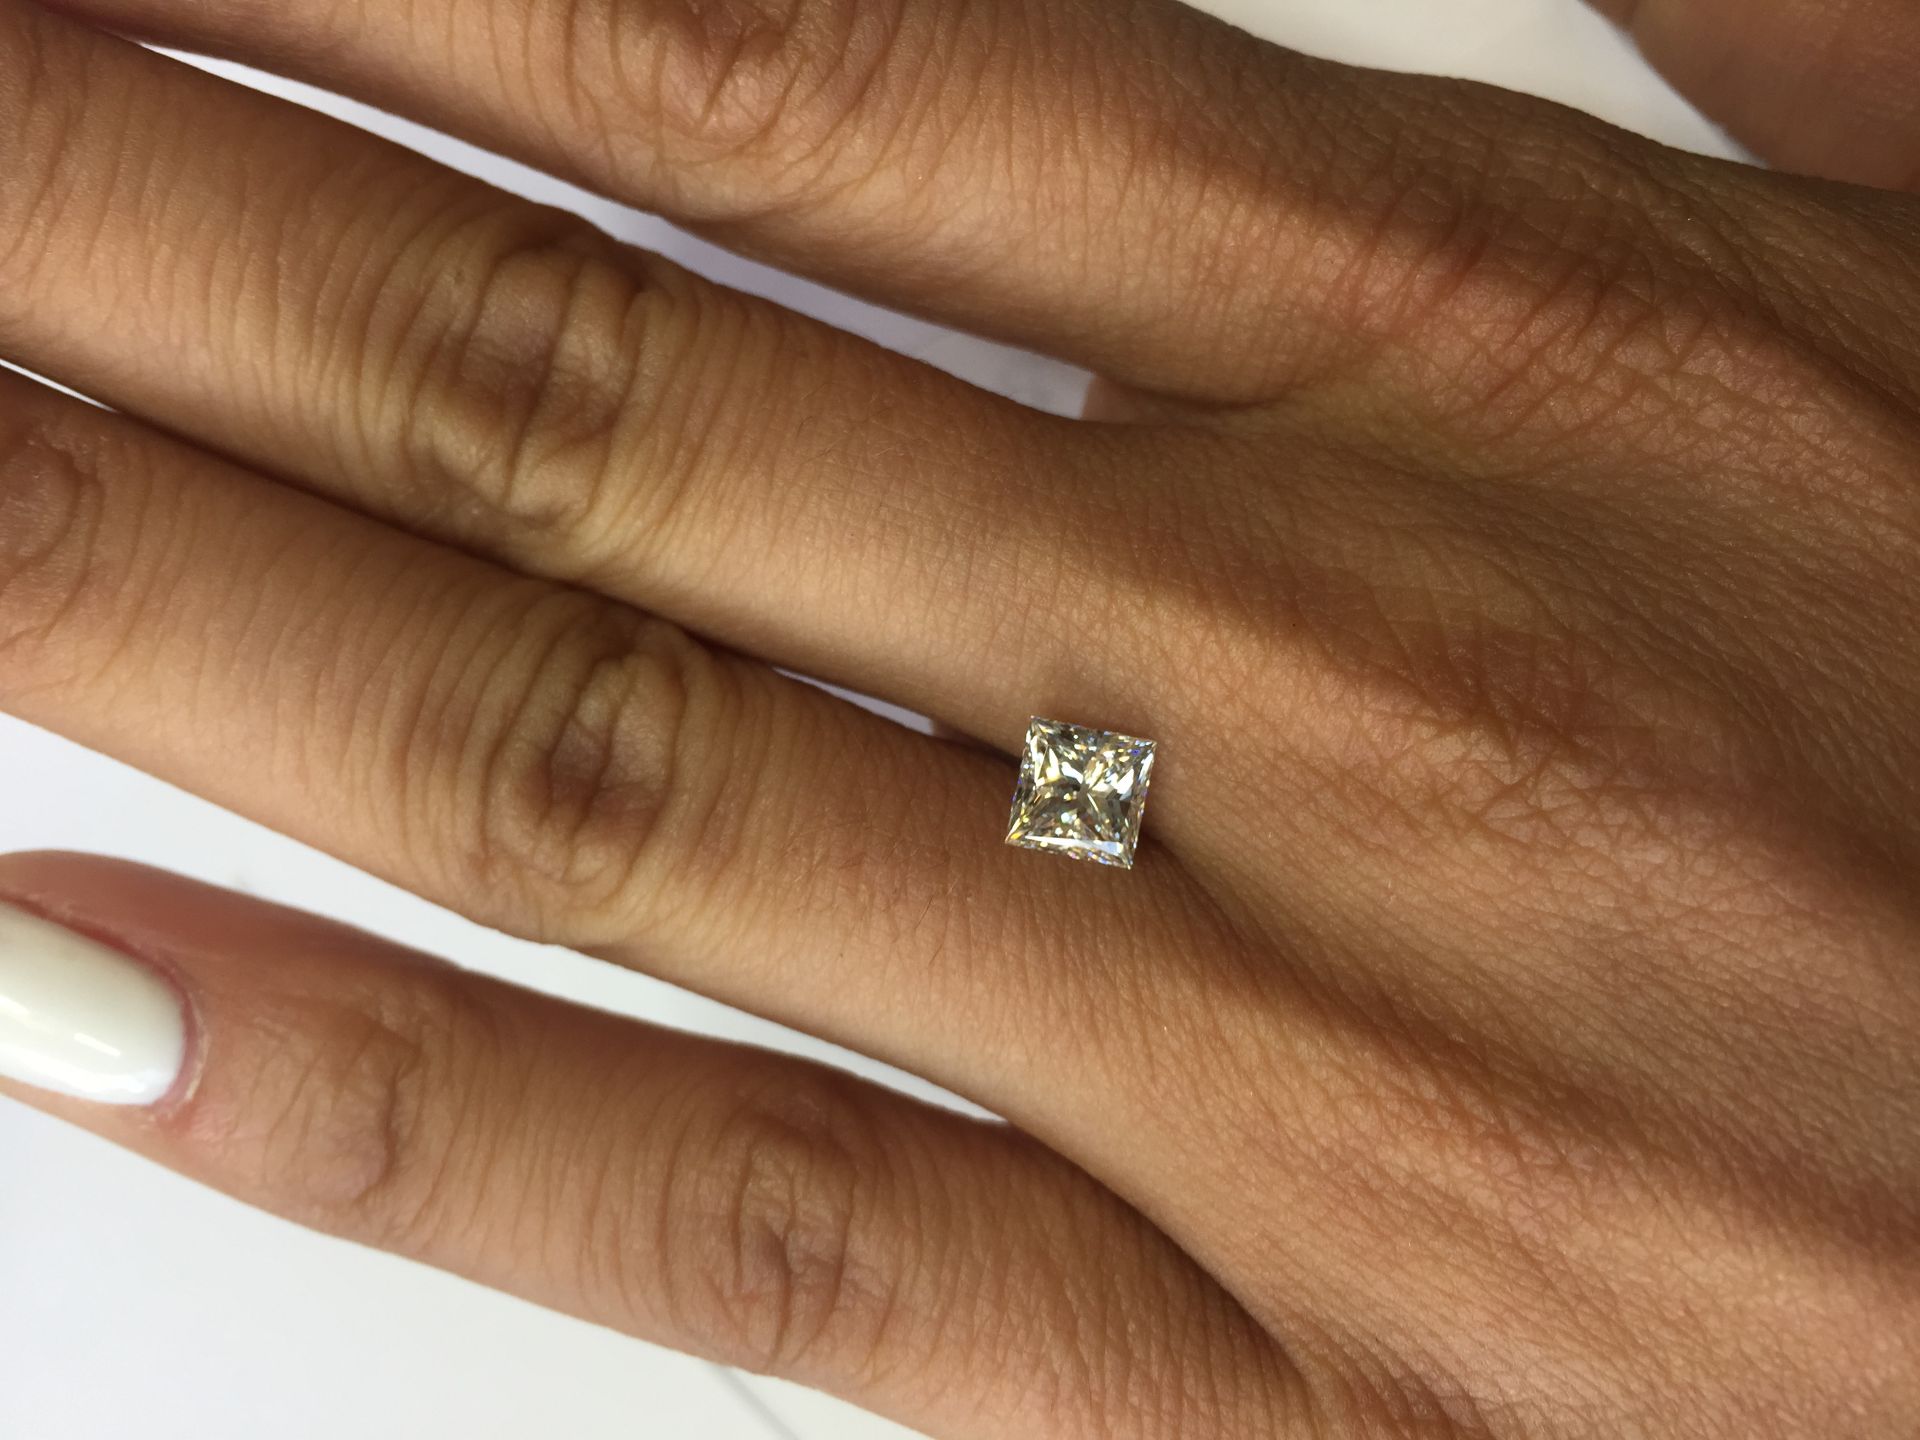 0.96ct princess cut diamond. F colour, SI1 clarity. No certification. Can be used for ring or - Image 4 of 4